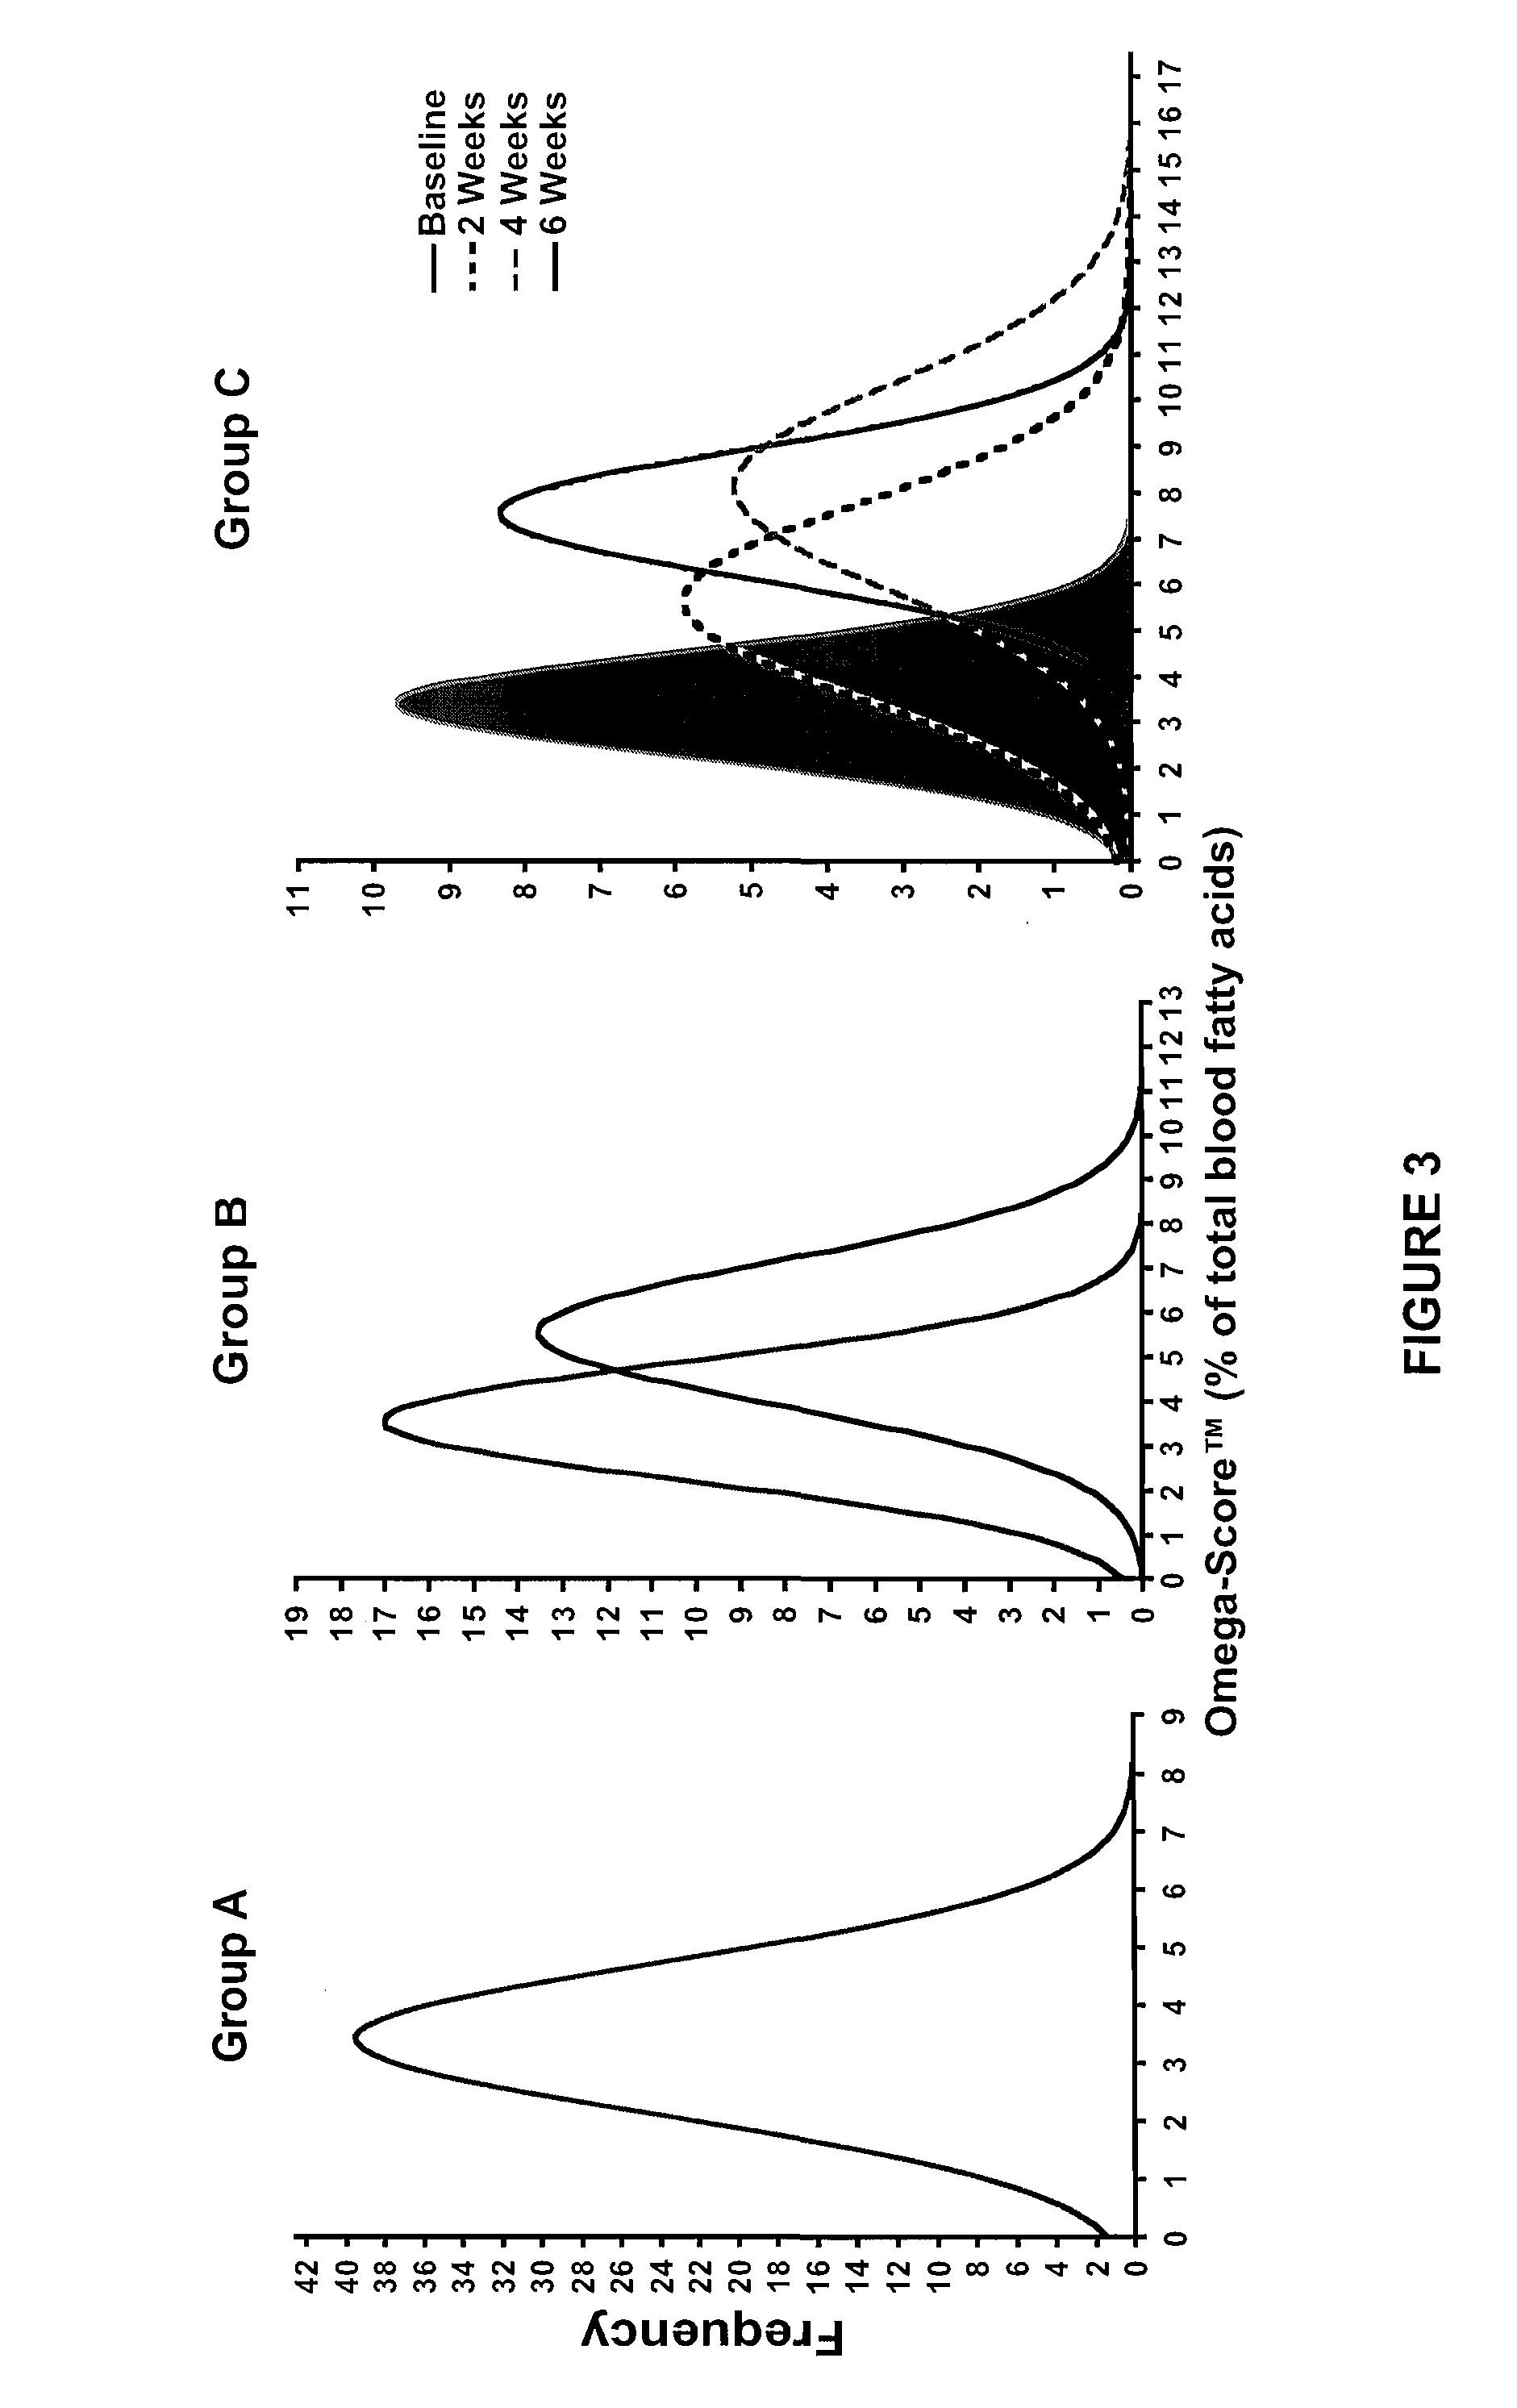 Method for treating obesity with Anti-obesity formulations and omega 3 fatty acids for the reduction of body weight in cardiovascular disease patients (CVD) and diabetics